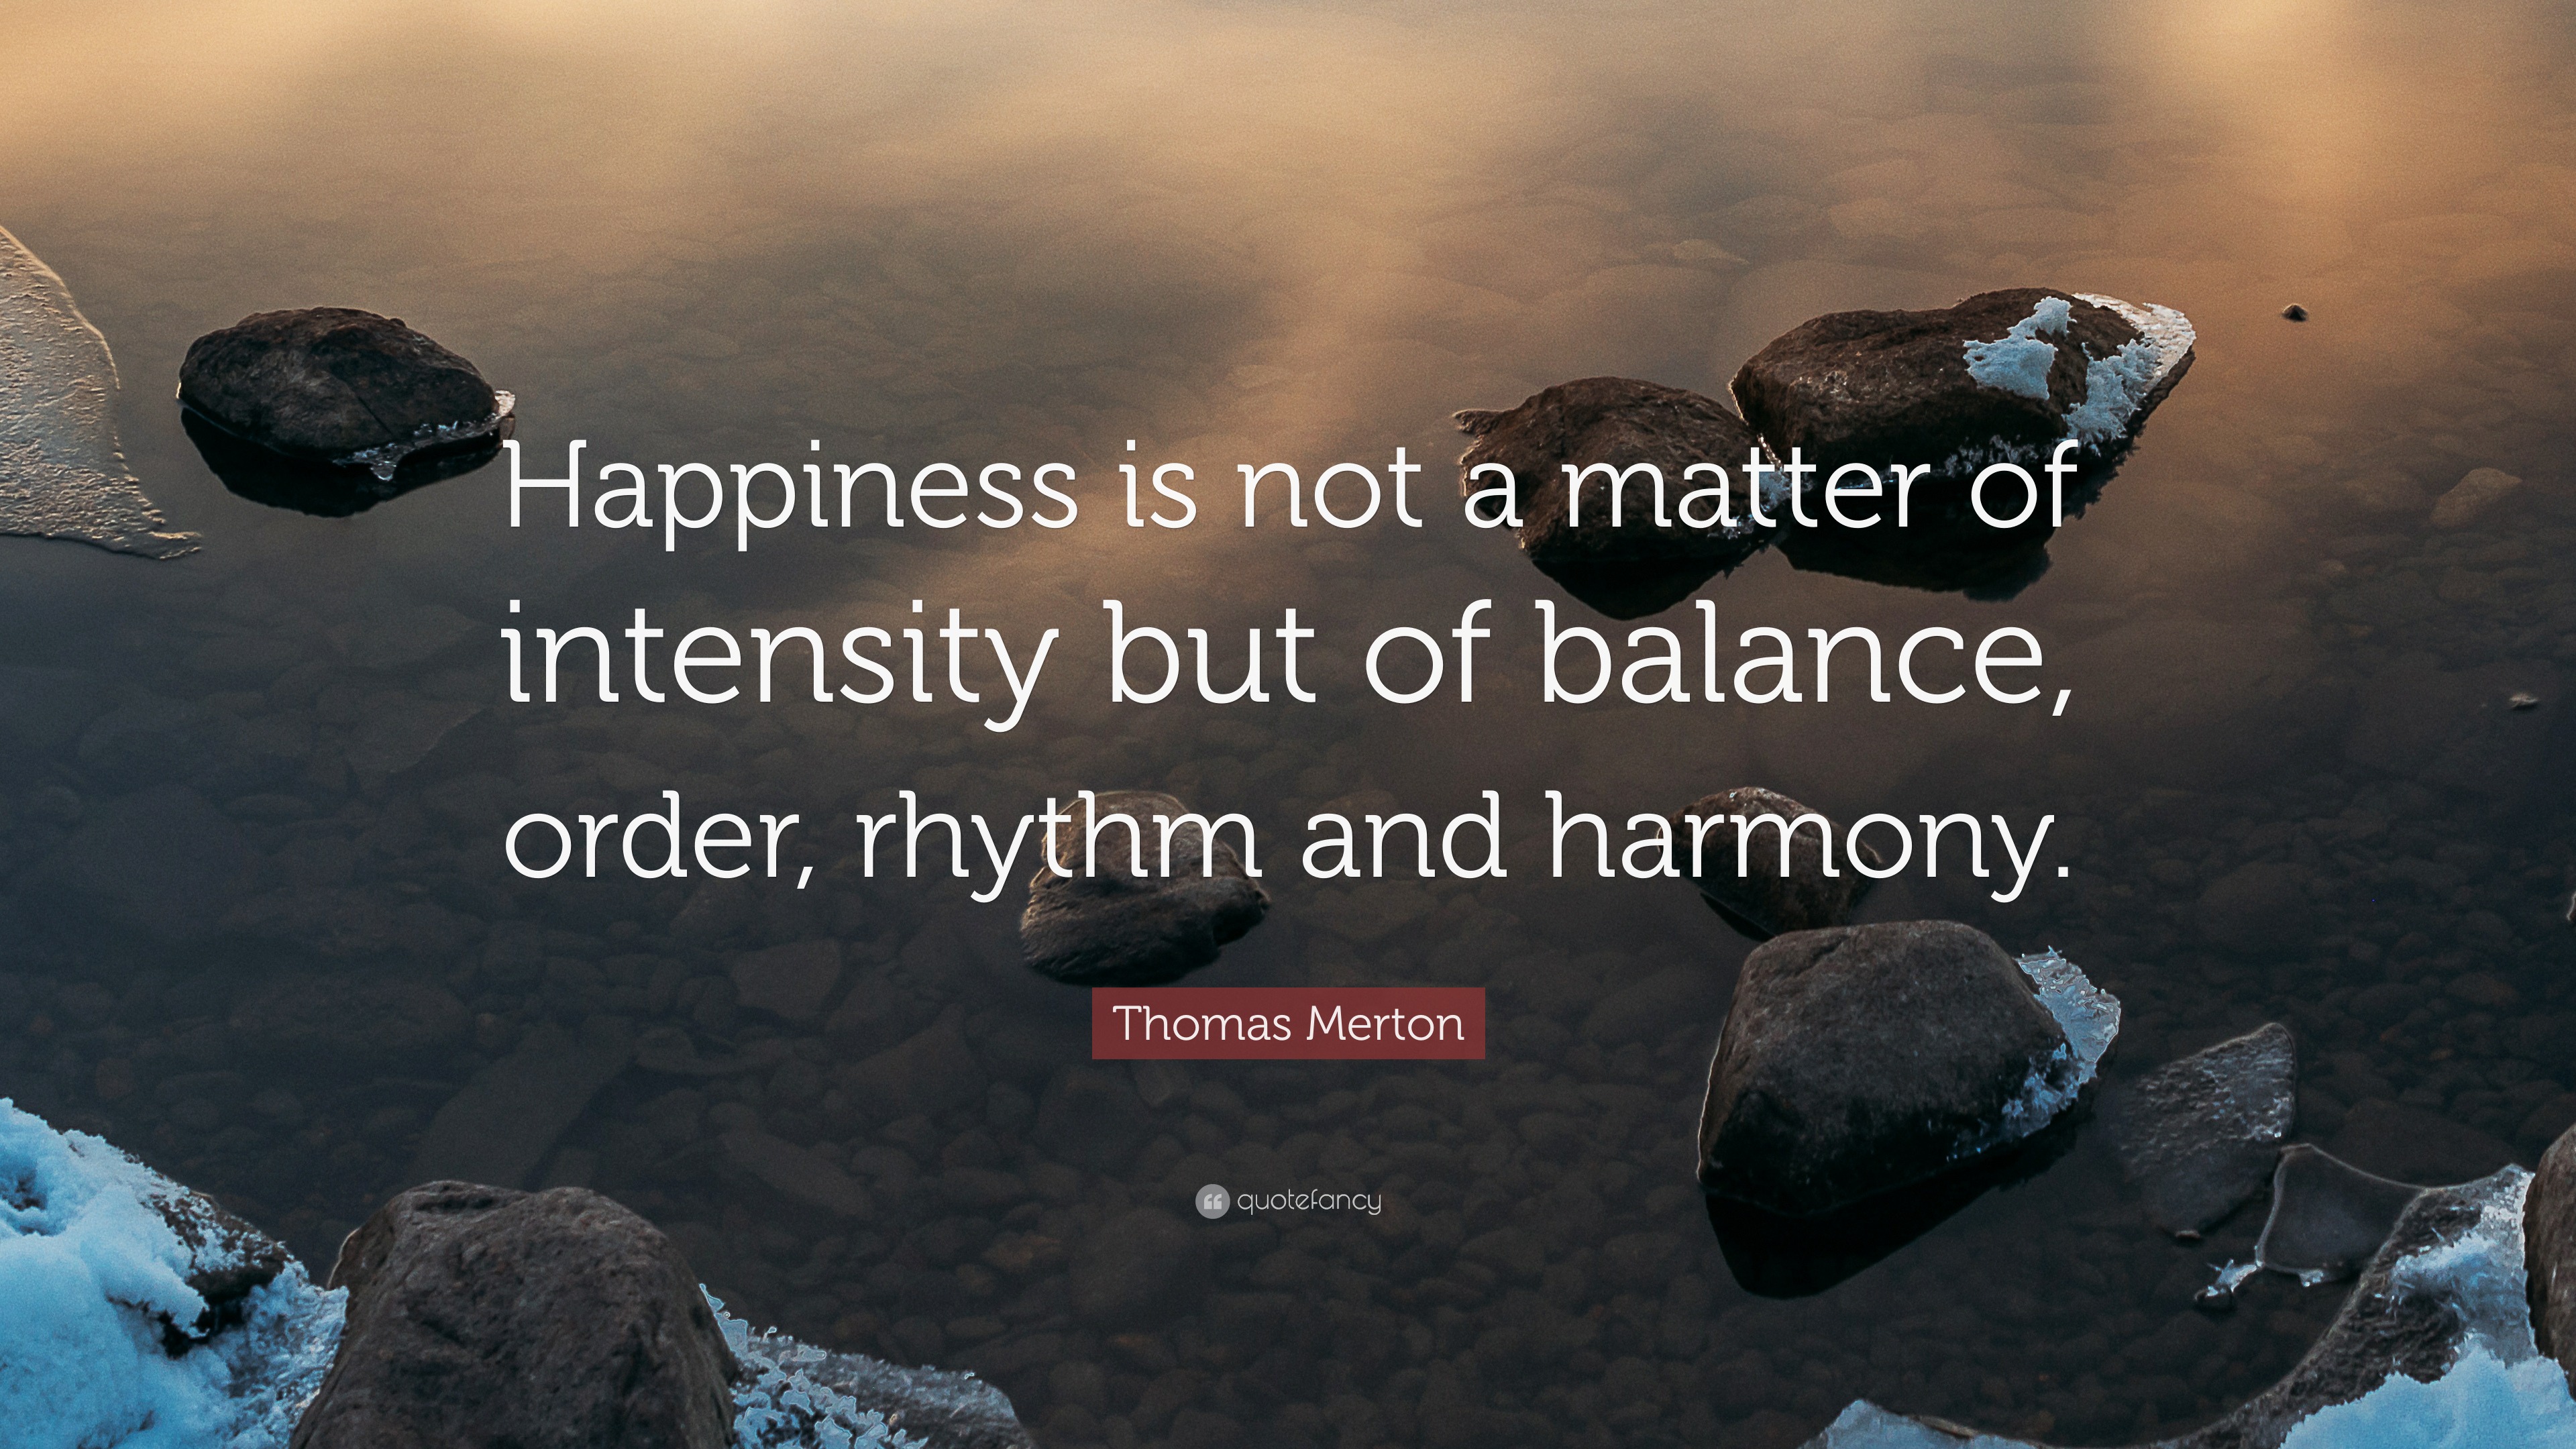 AYOLA - Find your happiness. It is not a matter of intensity but